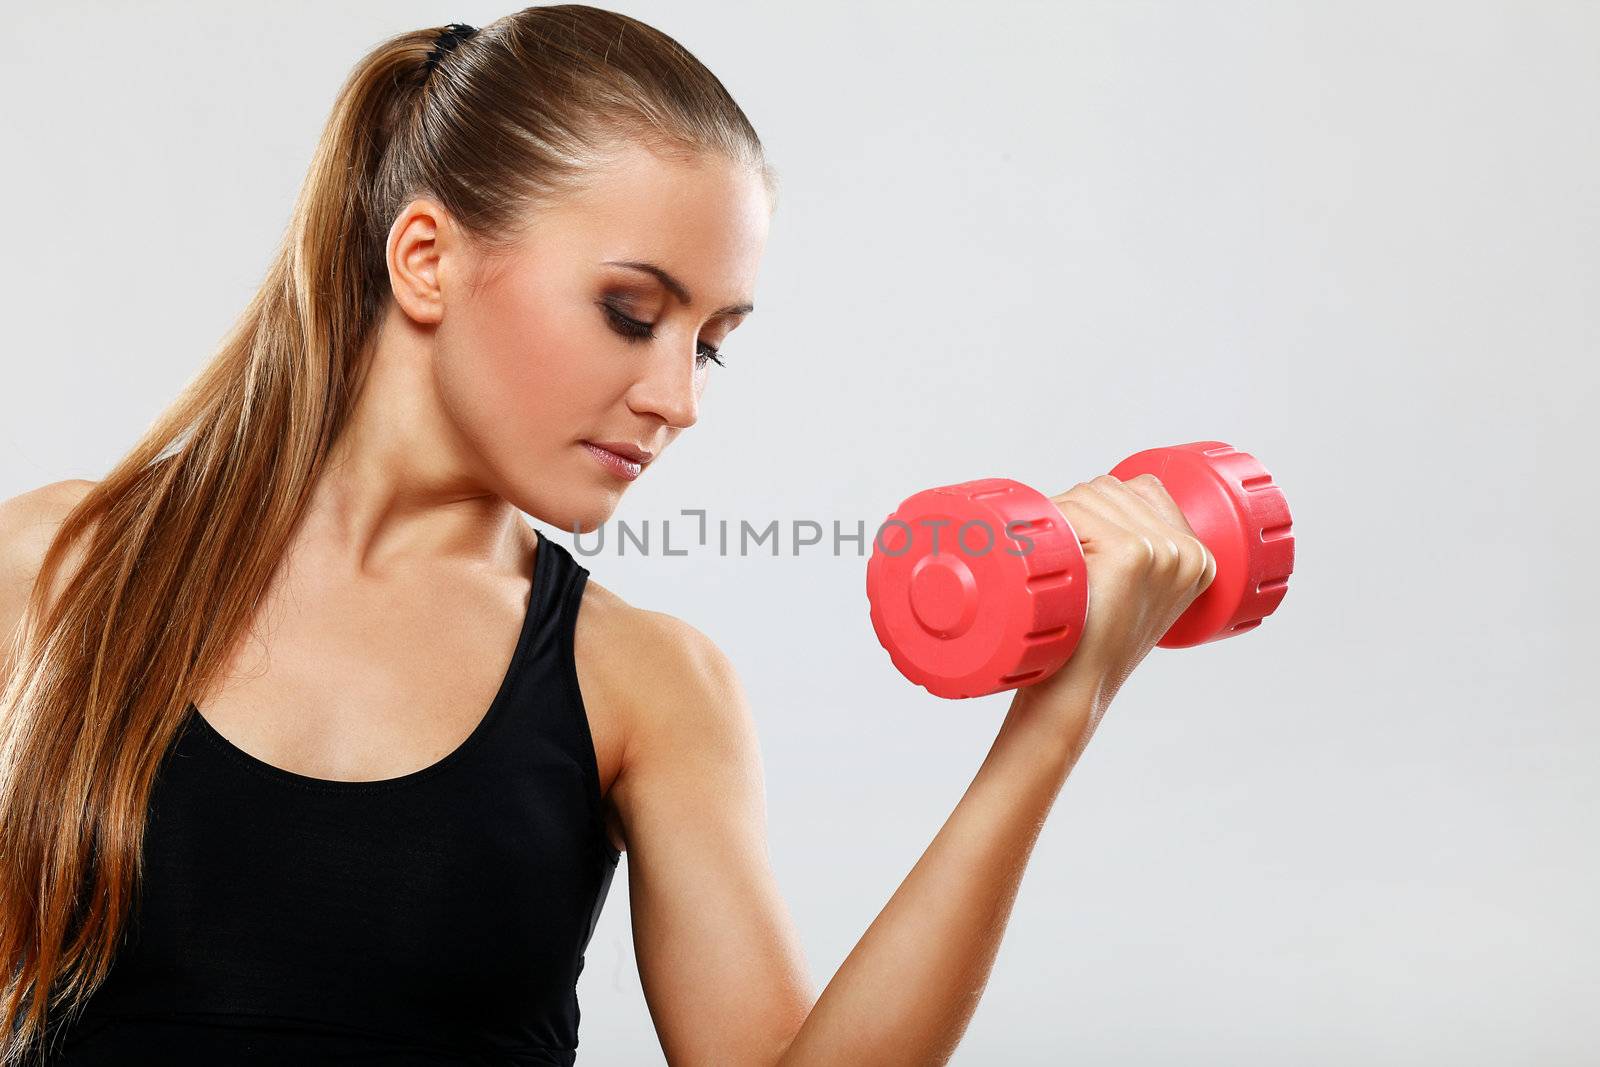 Beautiful brunette working out with dumbbells over gray background